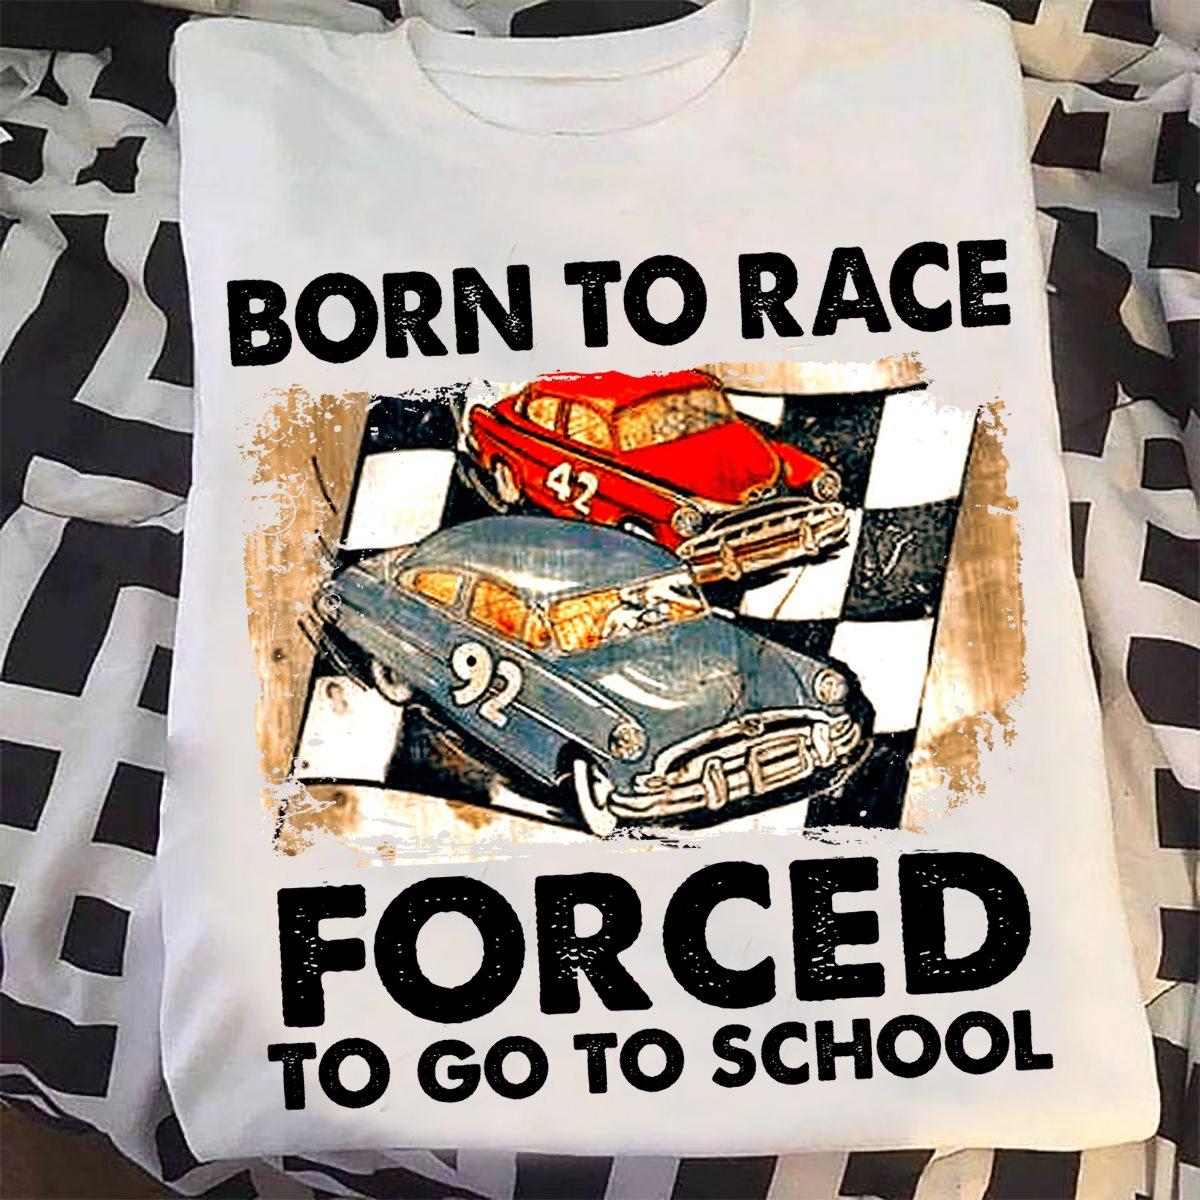 Born to race, forced to go to school - Hot rod racing